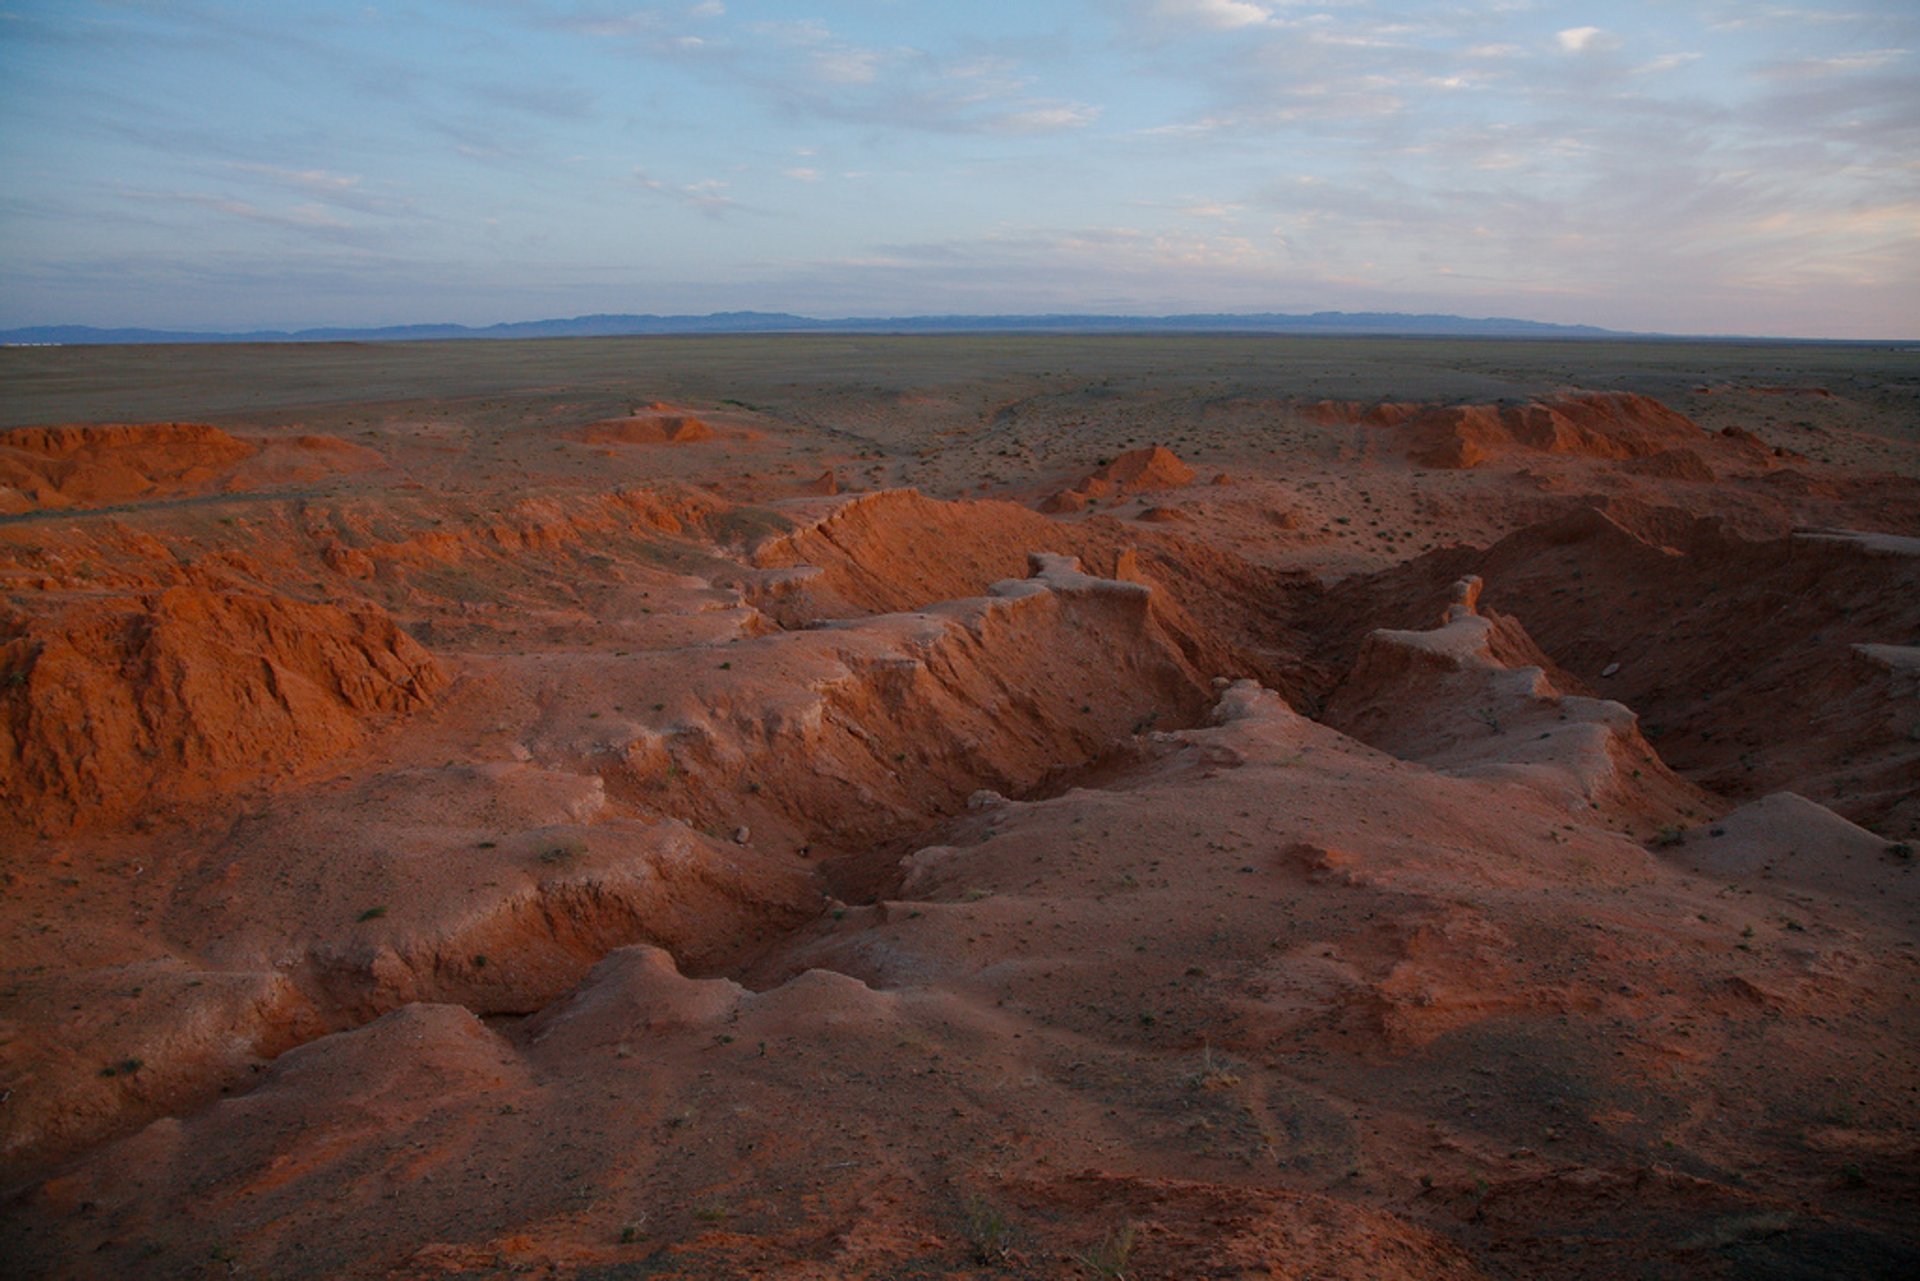 Sunset at the Flaming Cliffs